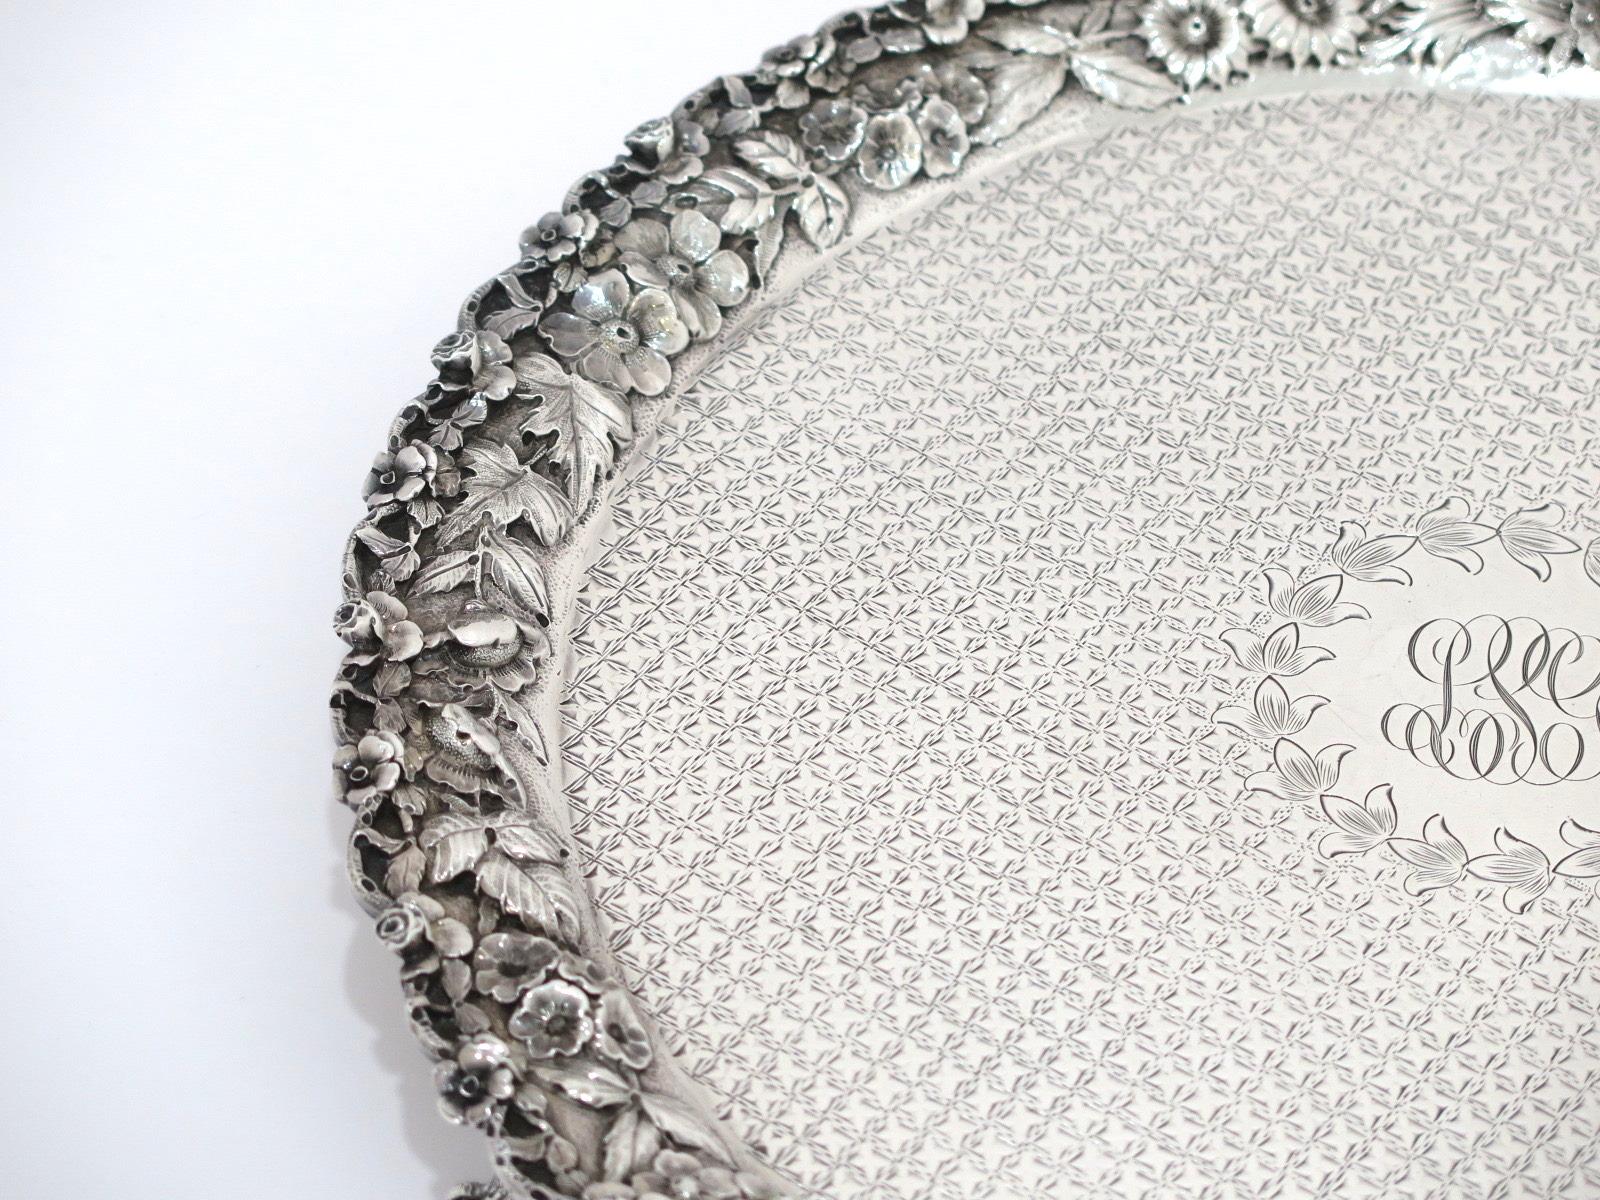 Dimensions: 12 x 1 3/8 in

Weight: 28.6 toz

The floral repousse border is in excellent condition.